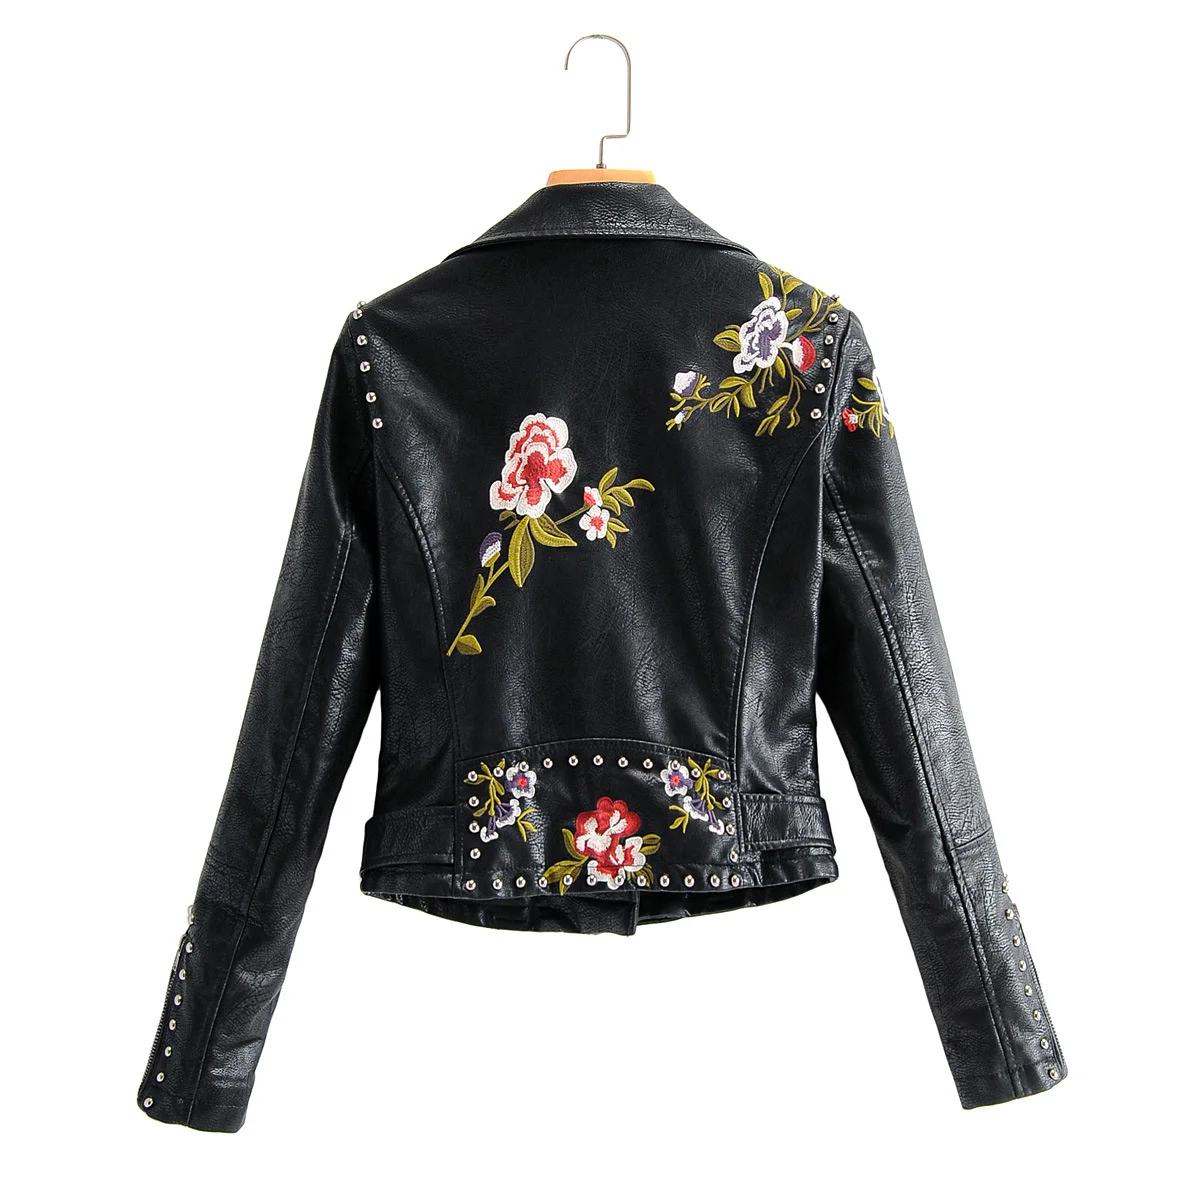 Fashion women's flower embroidery PU leather clothes women's Rivet decoration slim leather jacket enlarge